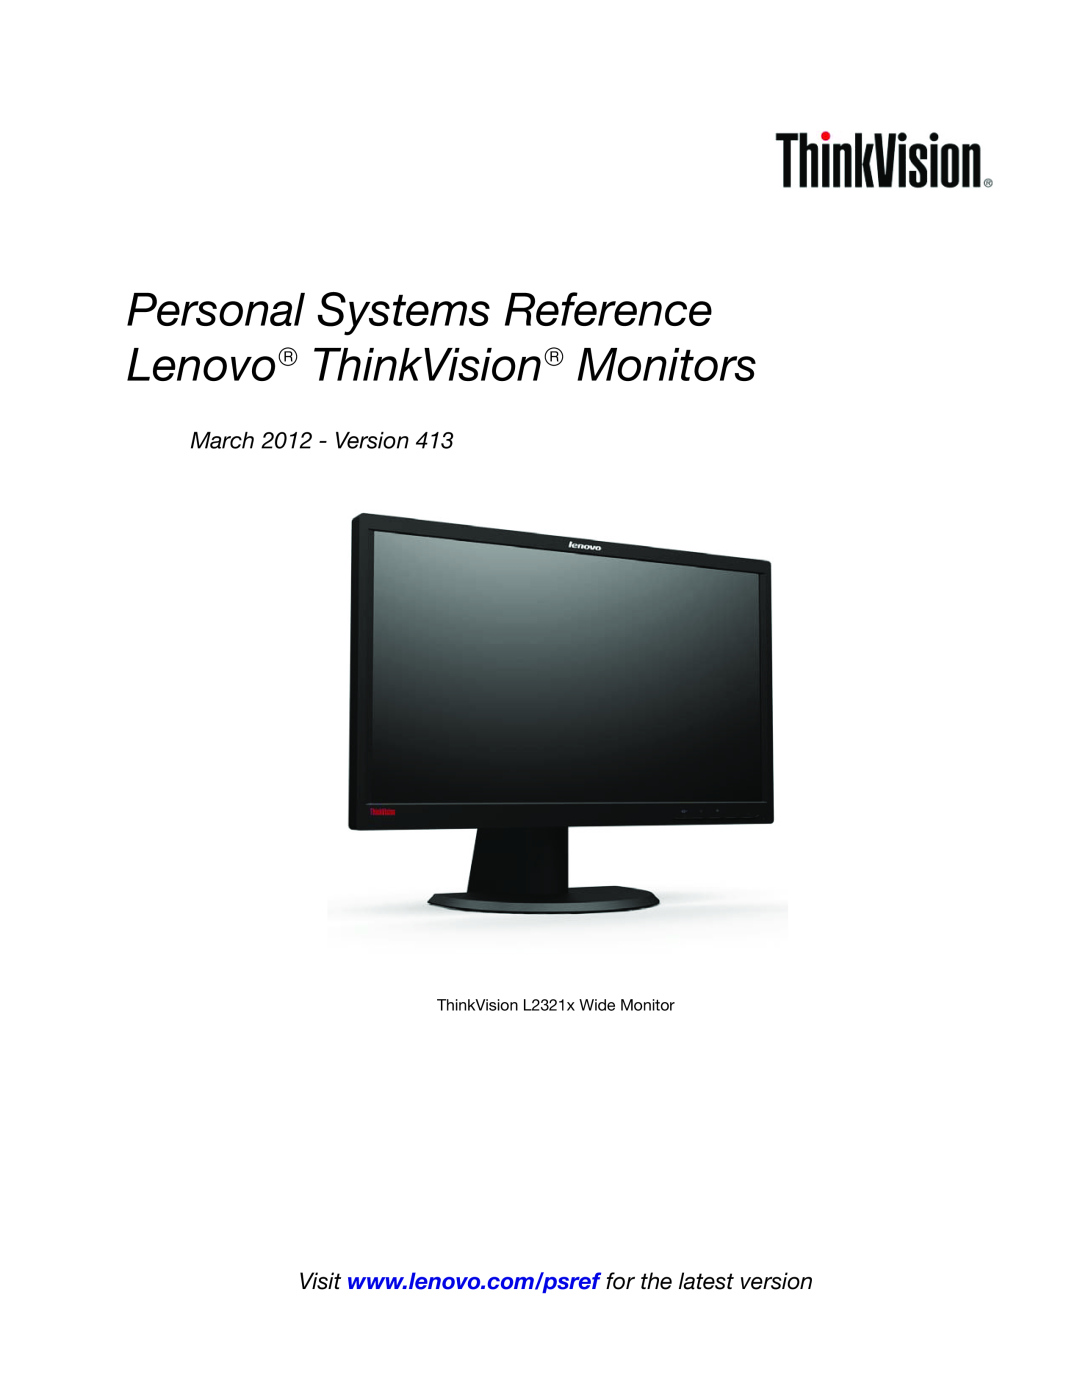 Lenovo manual ThinkVision L2321x Wide Monitor, March 2012 - Version 